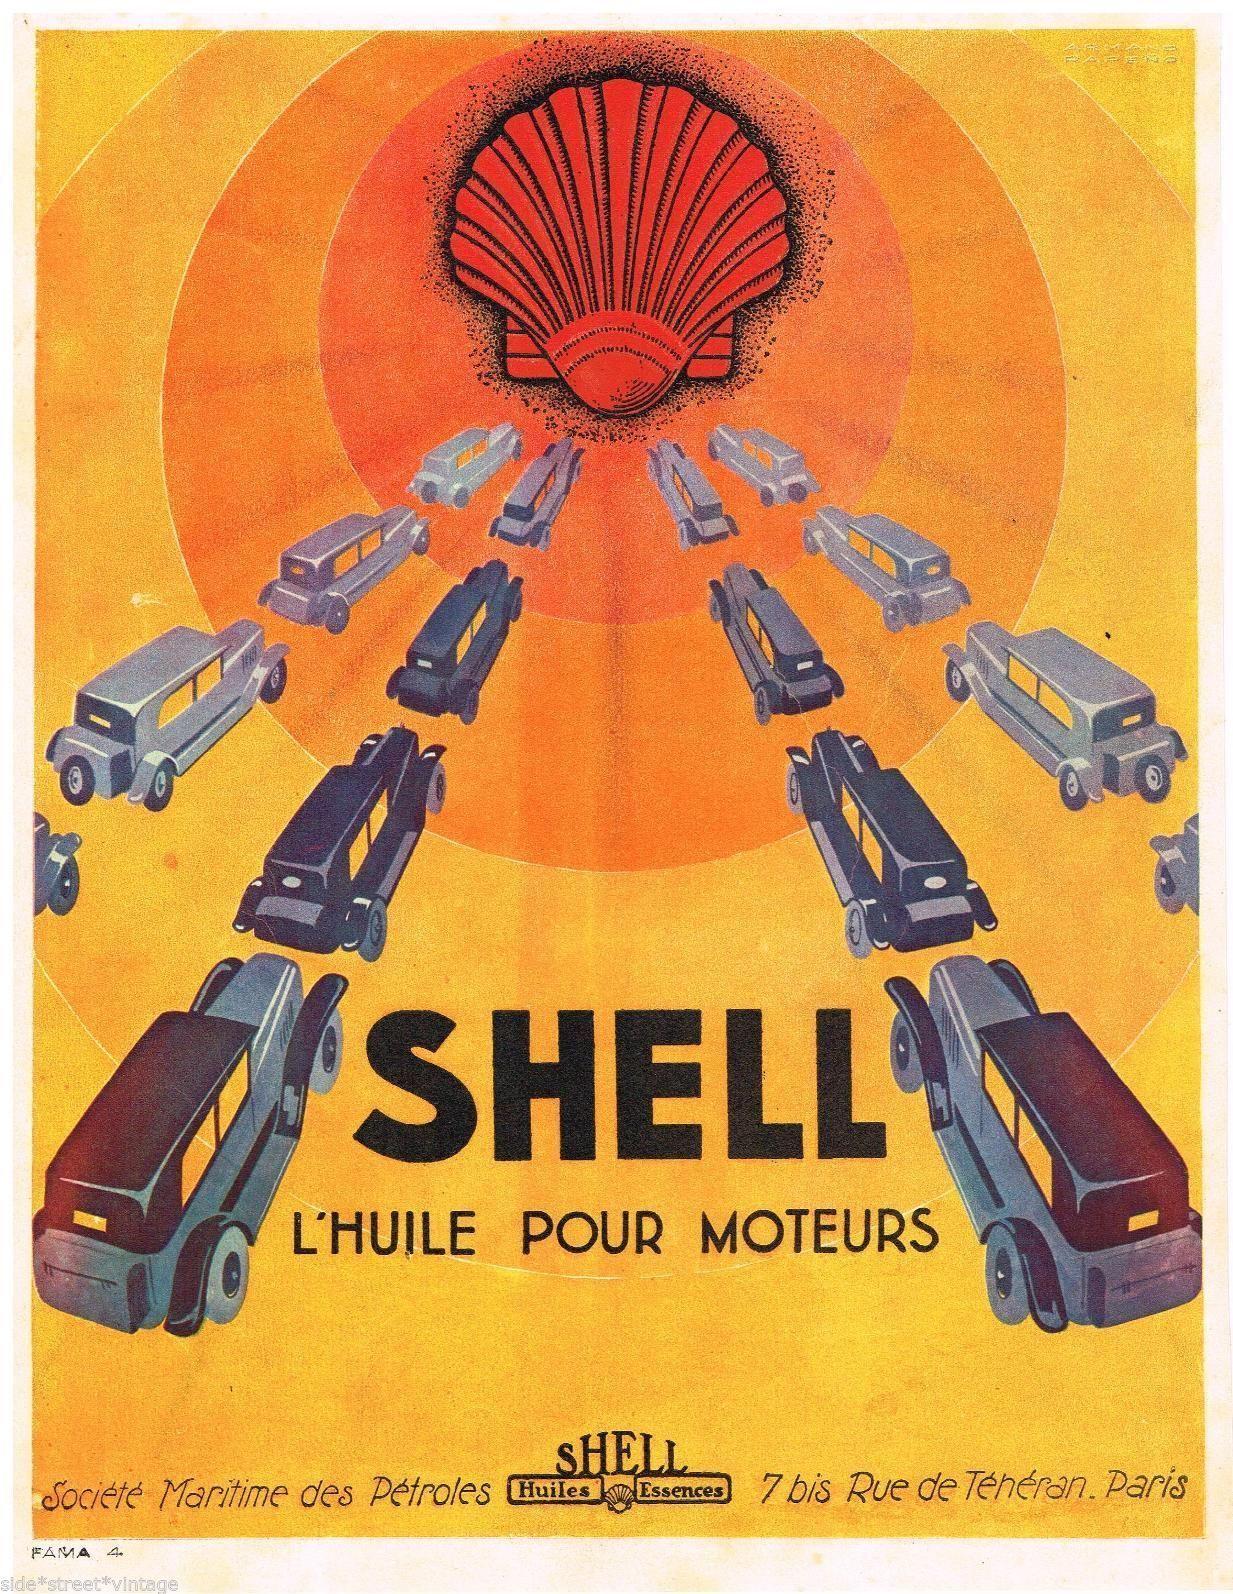 Old Shell Logo - Vintage Advertising RARE COLOUR EARLY SHELL OIL AD SHELL LOGO 1920's